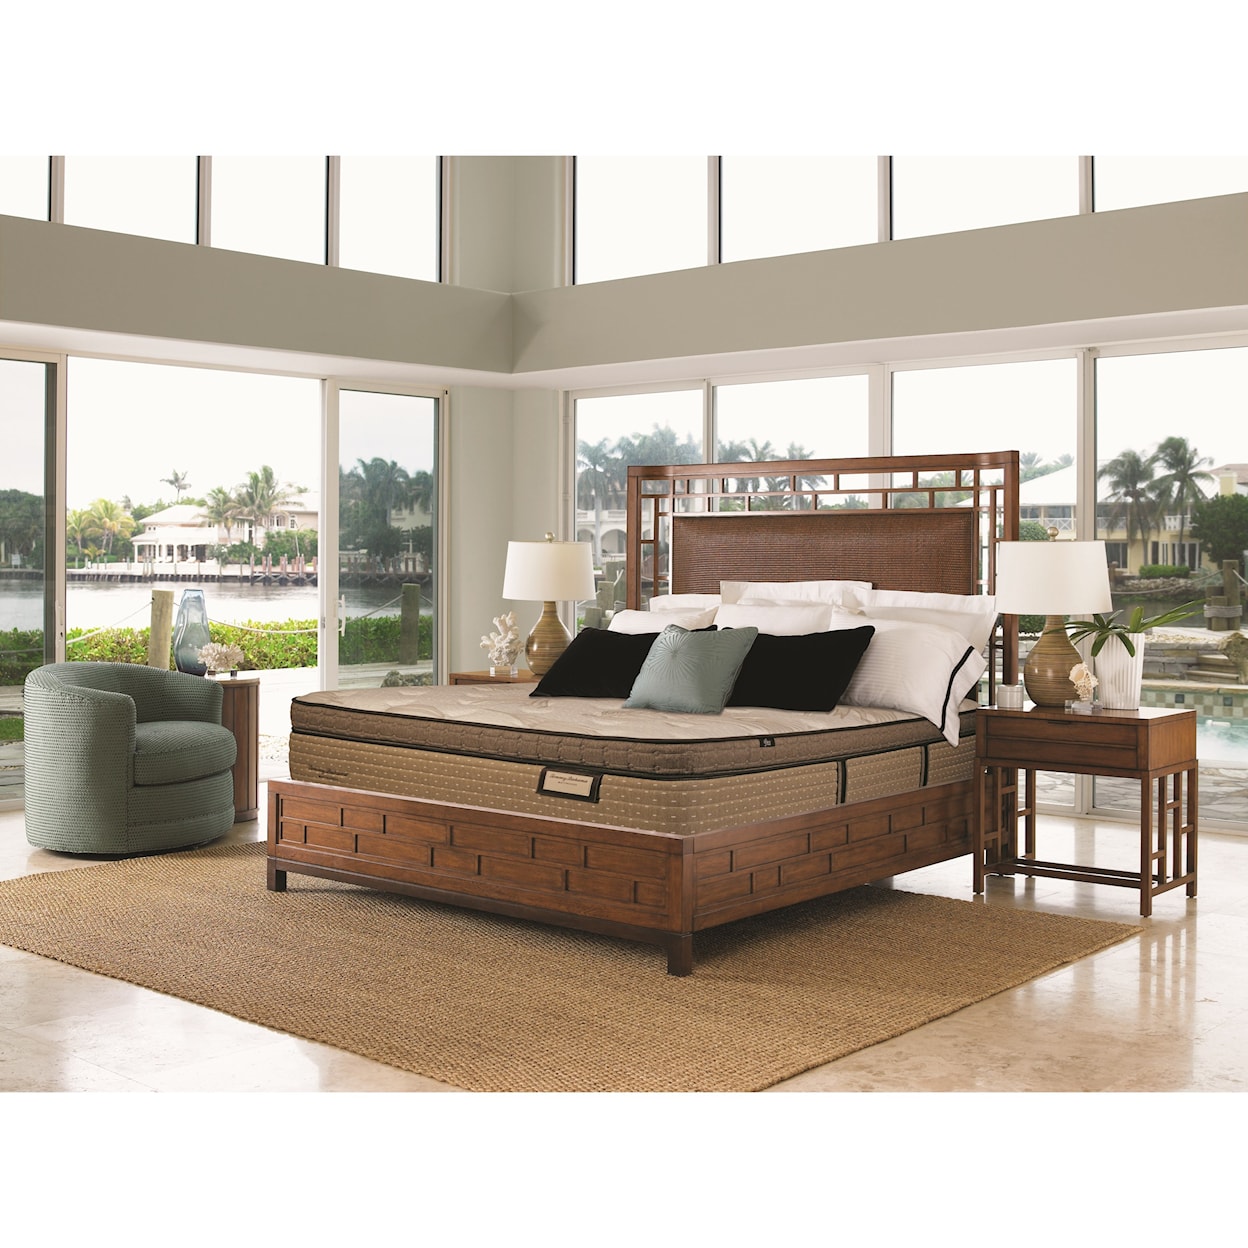 Therapedic Tommy Bahama Salty Kisses ET Queen Euro Top Luxury Mattress